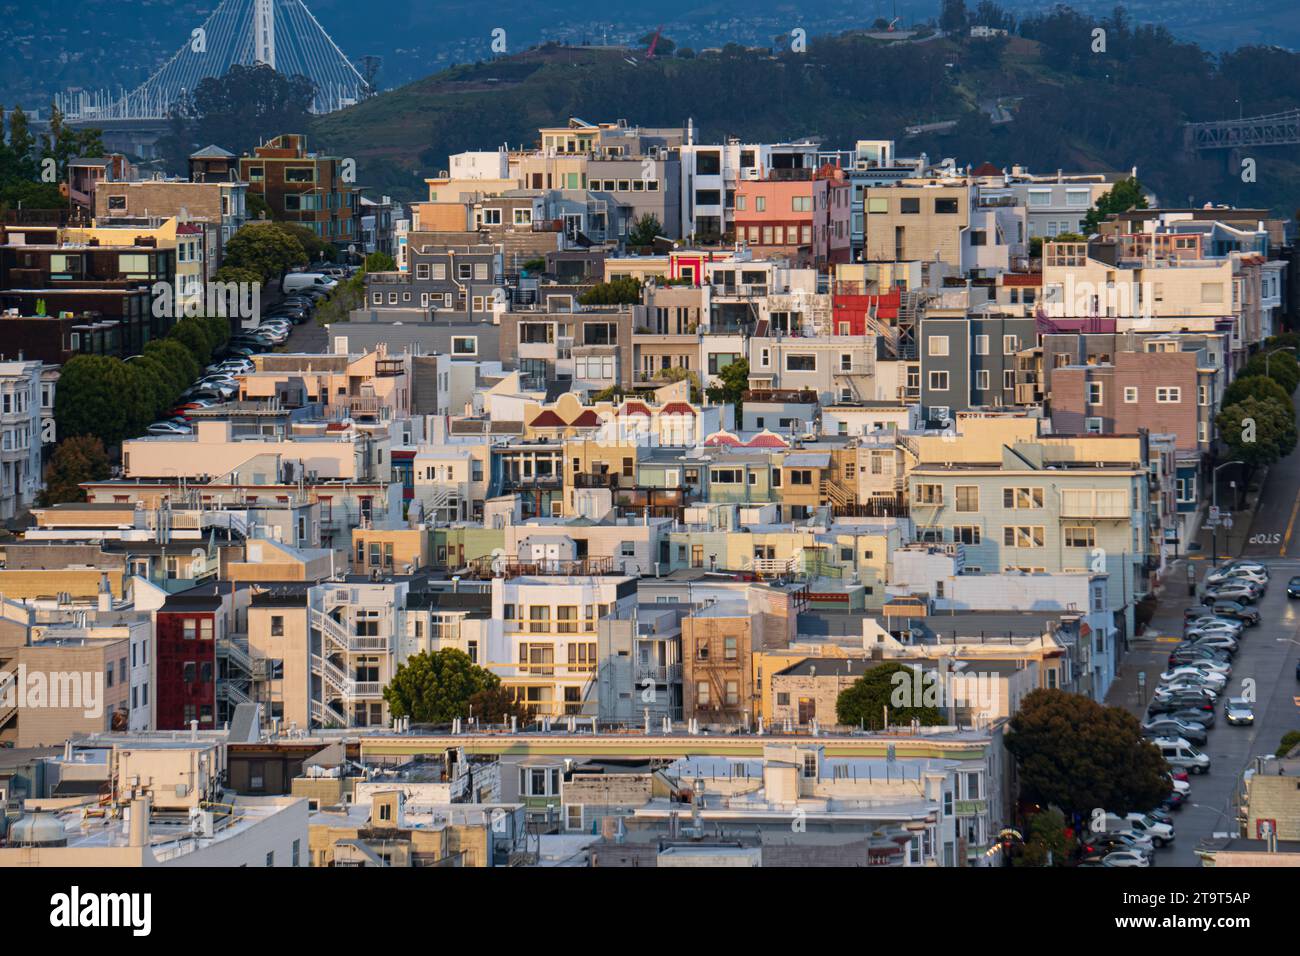 Residential area of San Francisco, California, sprawling up a hill, after a rain storm and at dusk. Stock Photo